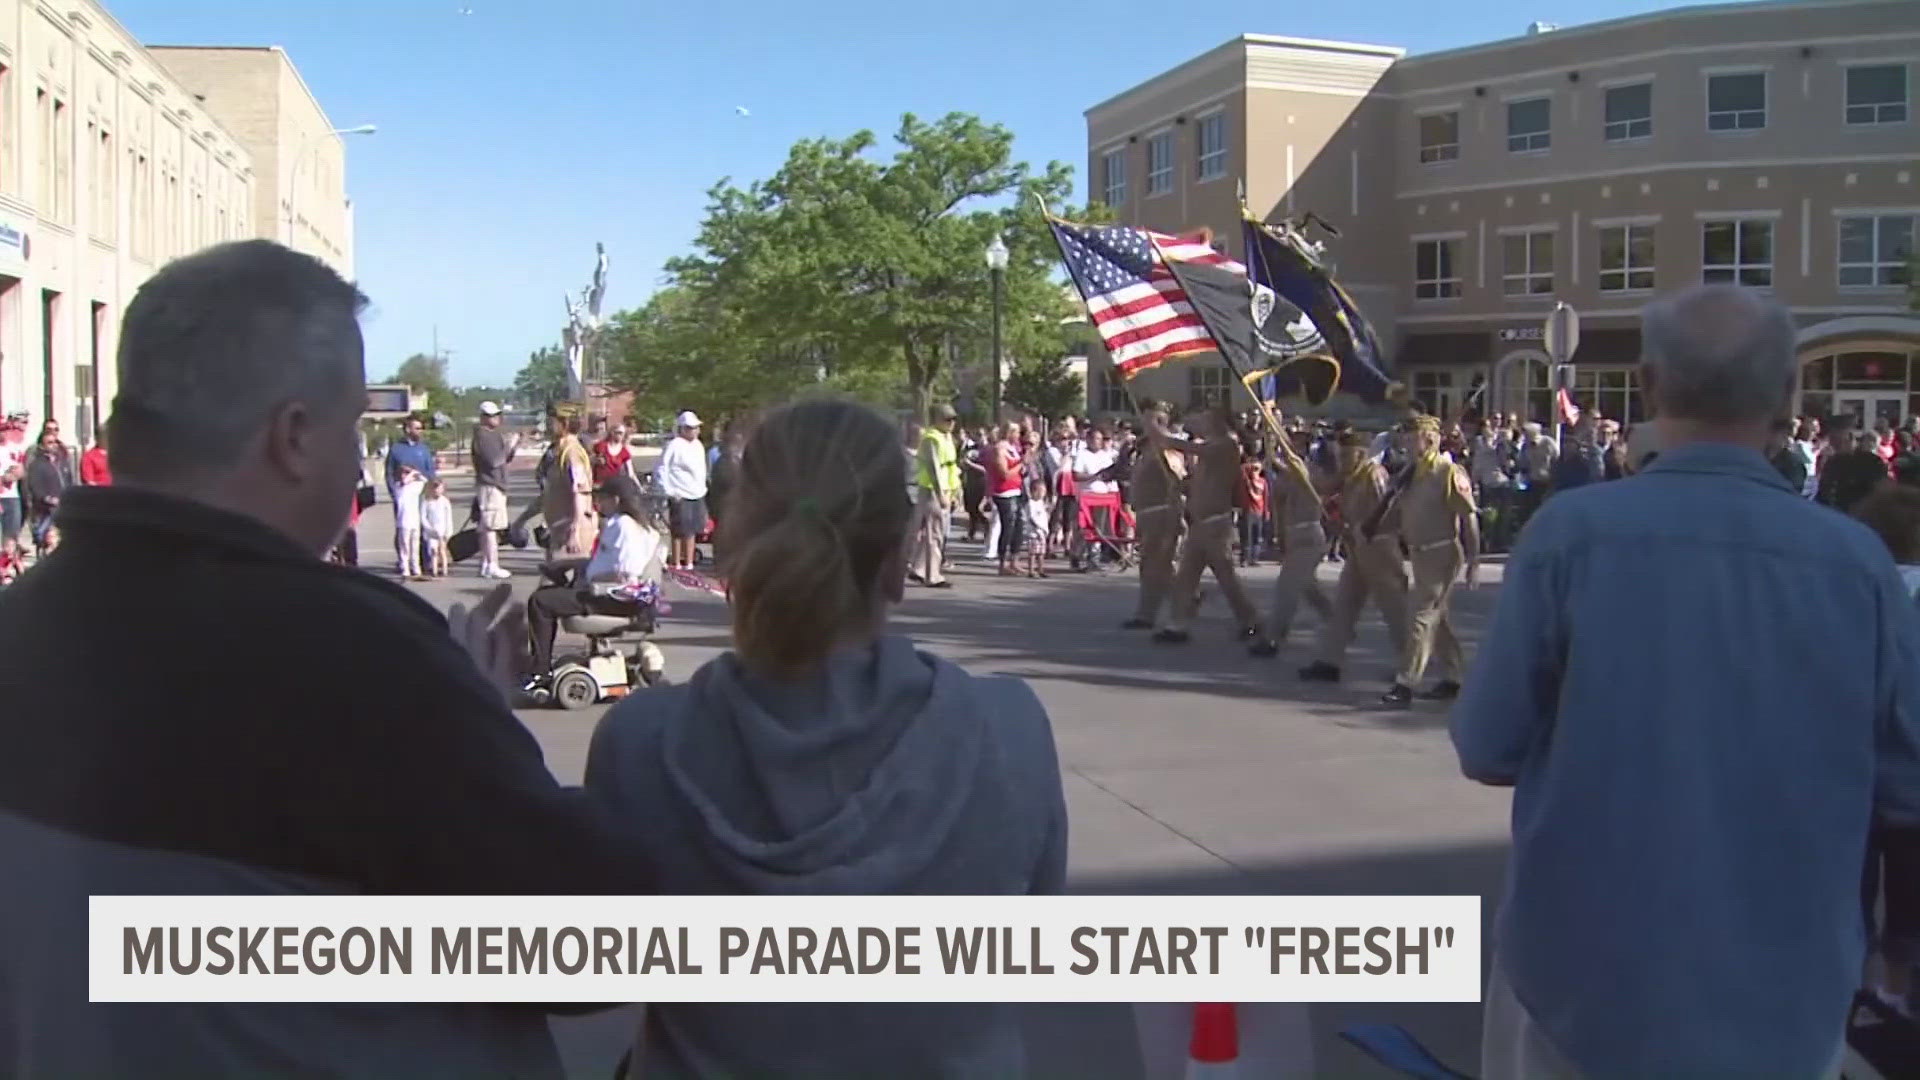 Muskegon's Memorial Day parade will be returning again this spring after it was almost canceled over controversy involving the NAACP last year.